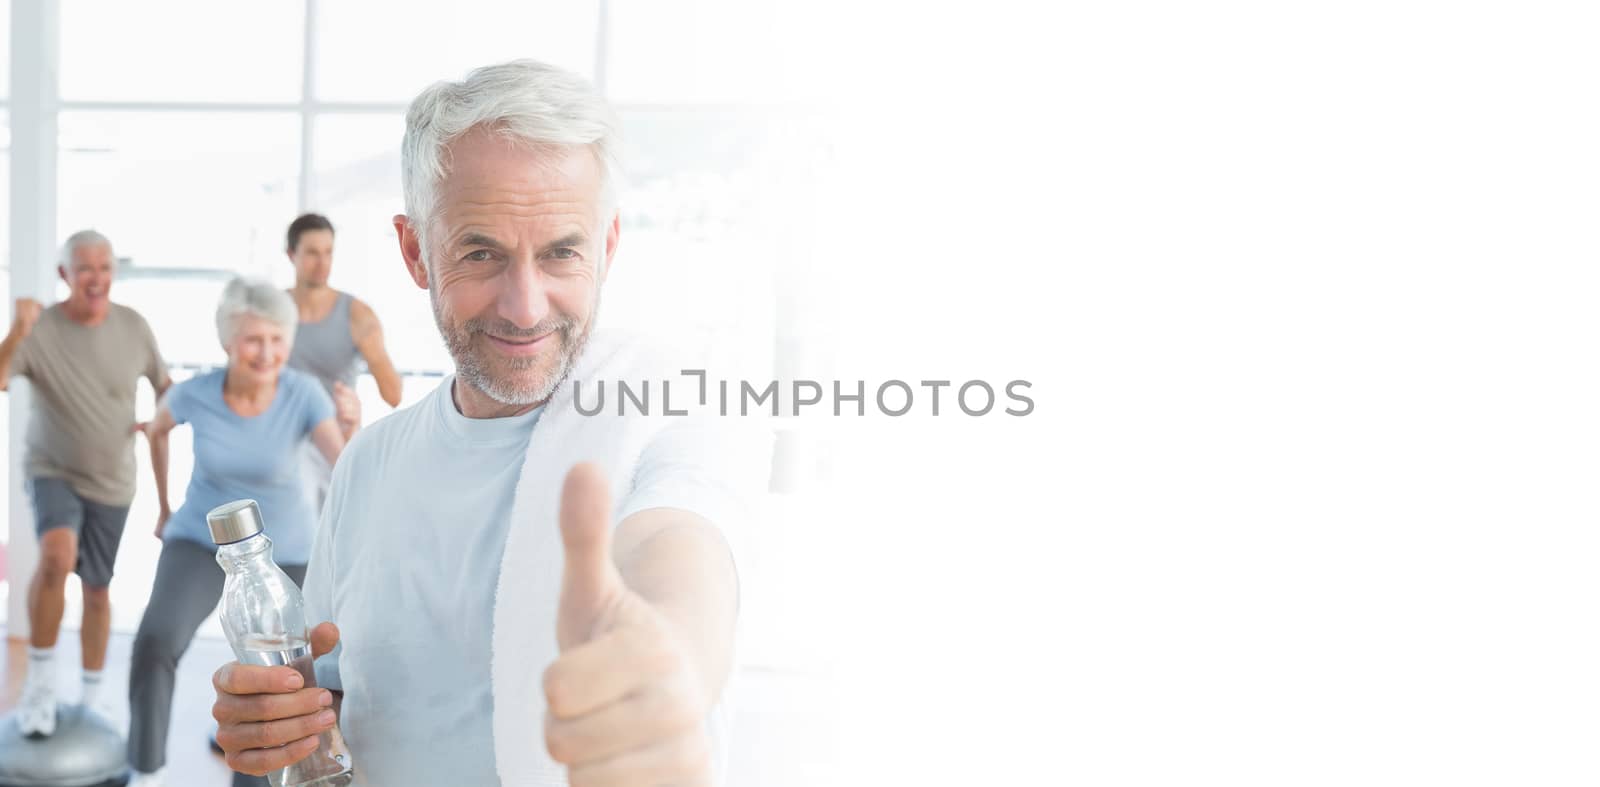 Man showing thumbs up sign with people exercising in background by Wavebreakmedia